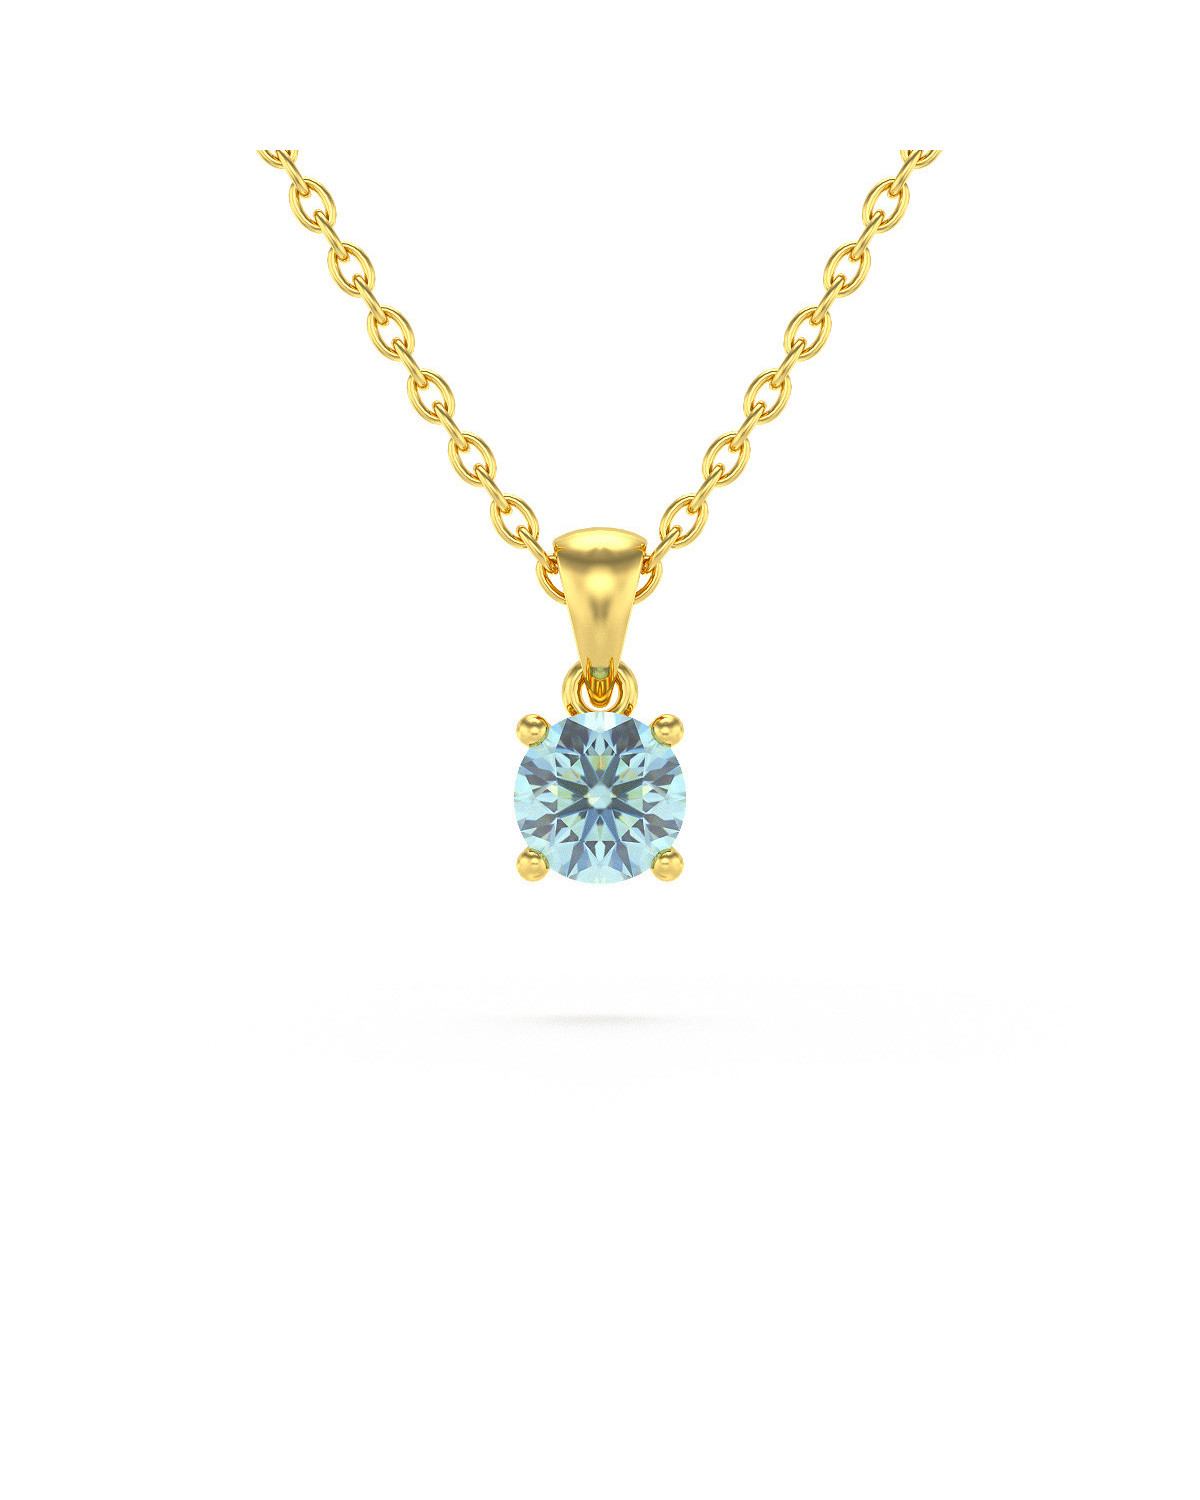 14K Gold Aquamarine Necklace Pendant Gold Chain included